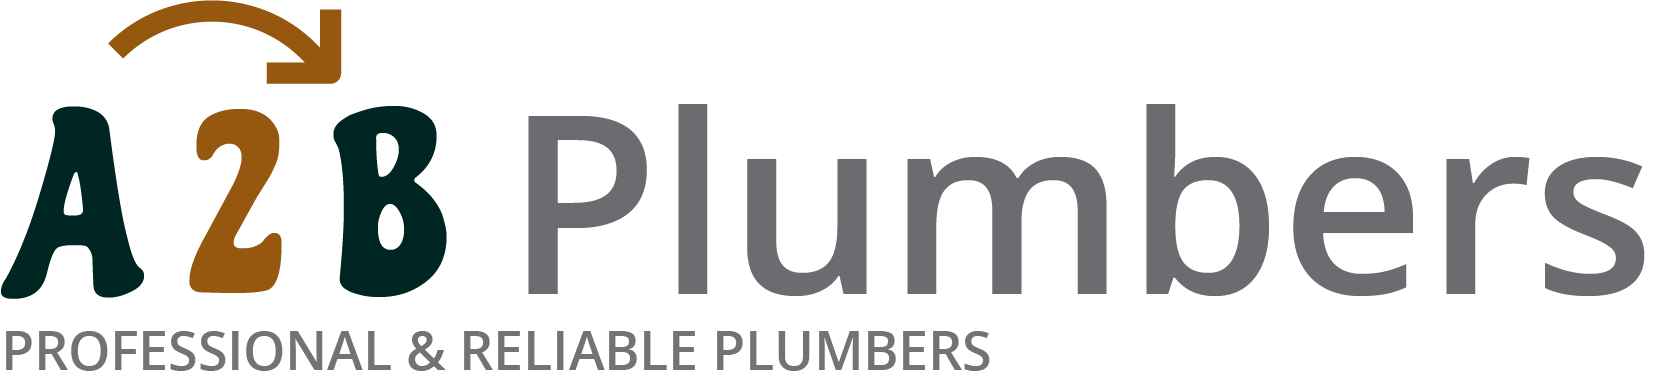 If you need a boiler installed, a radiator repaired or a leaking tap fixed, call us now - we provide services for properties in Annfield Plain and the local area.